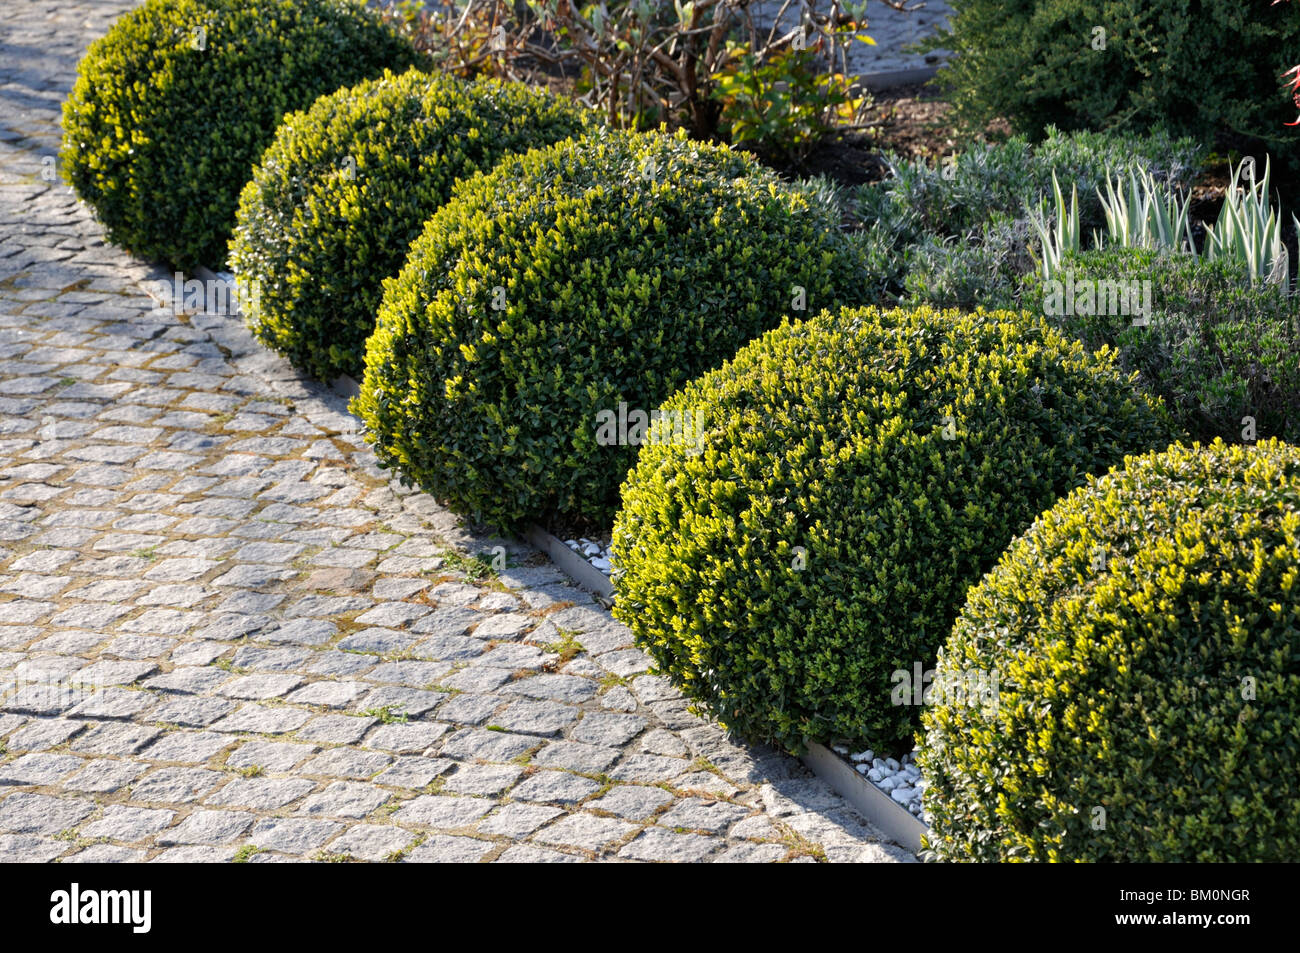 Common boxwood (Buxus sempervirens) with spherical shape Stock Photo